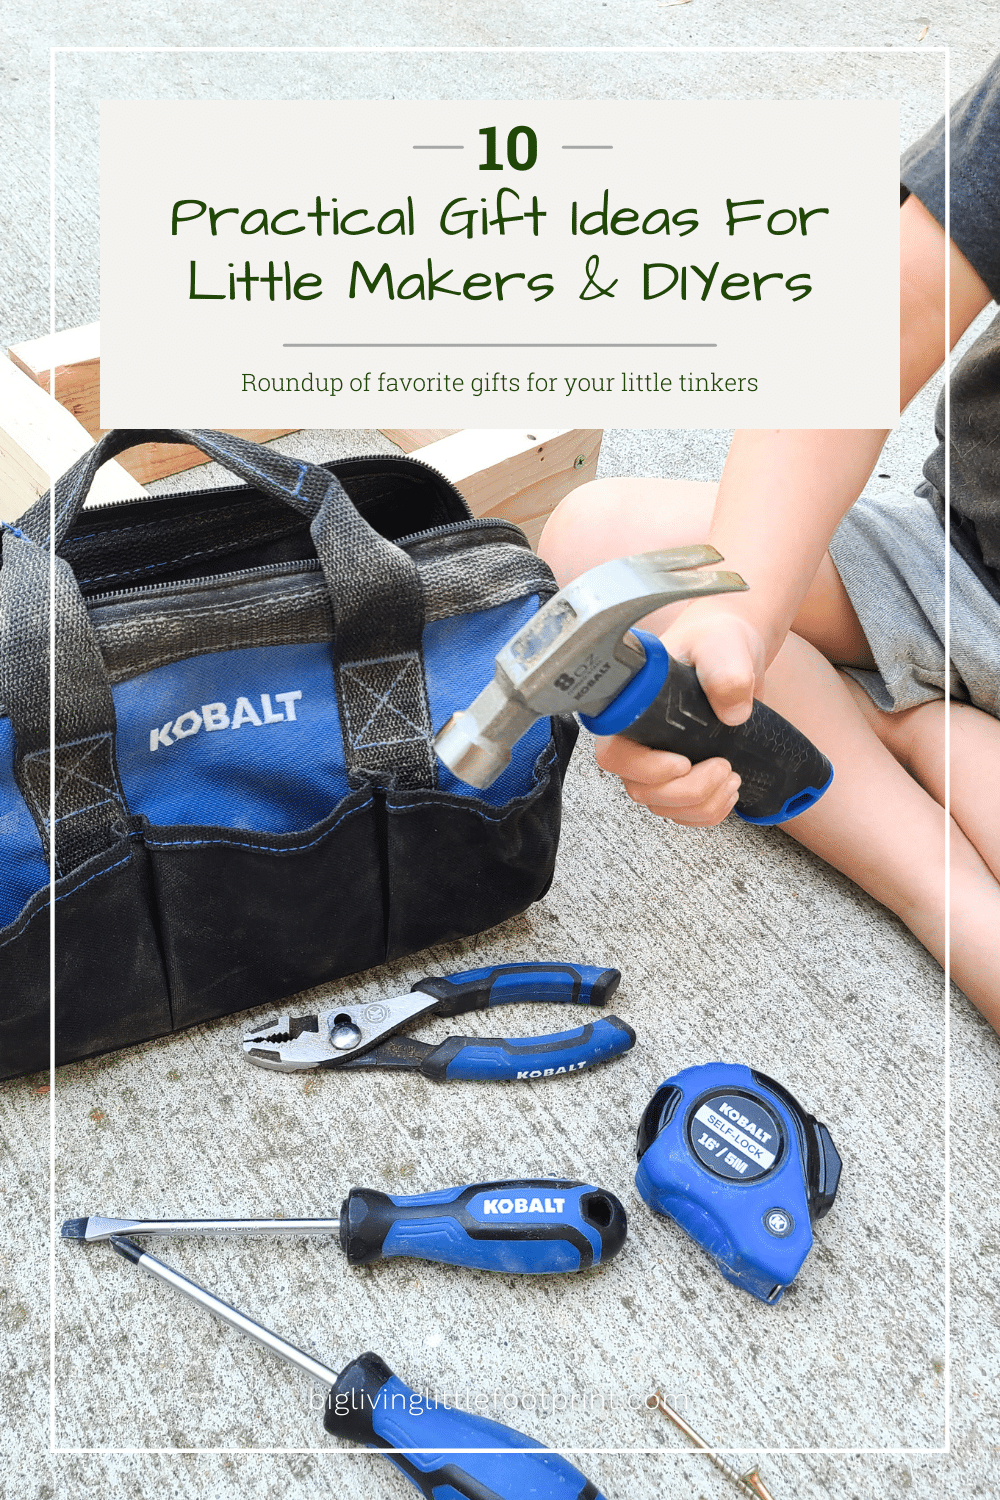 10 Practical Gift Ideas For Little Makers & DIYers